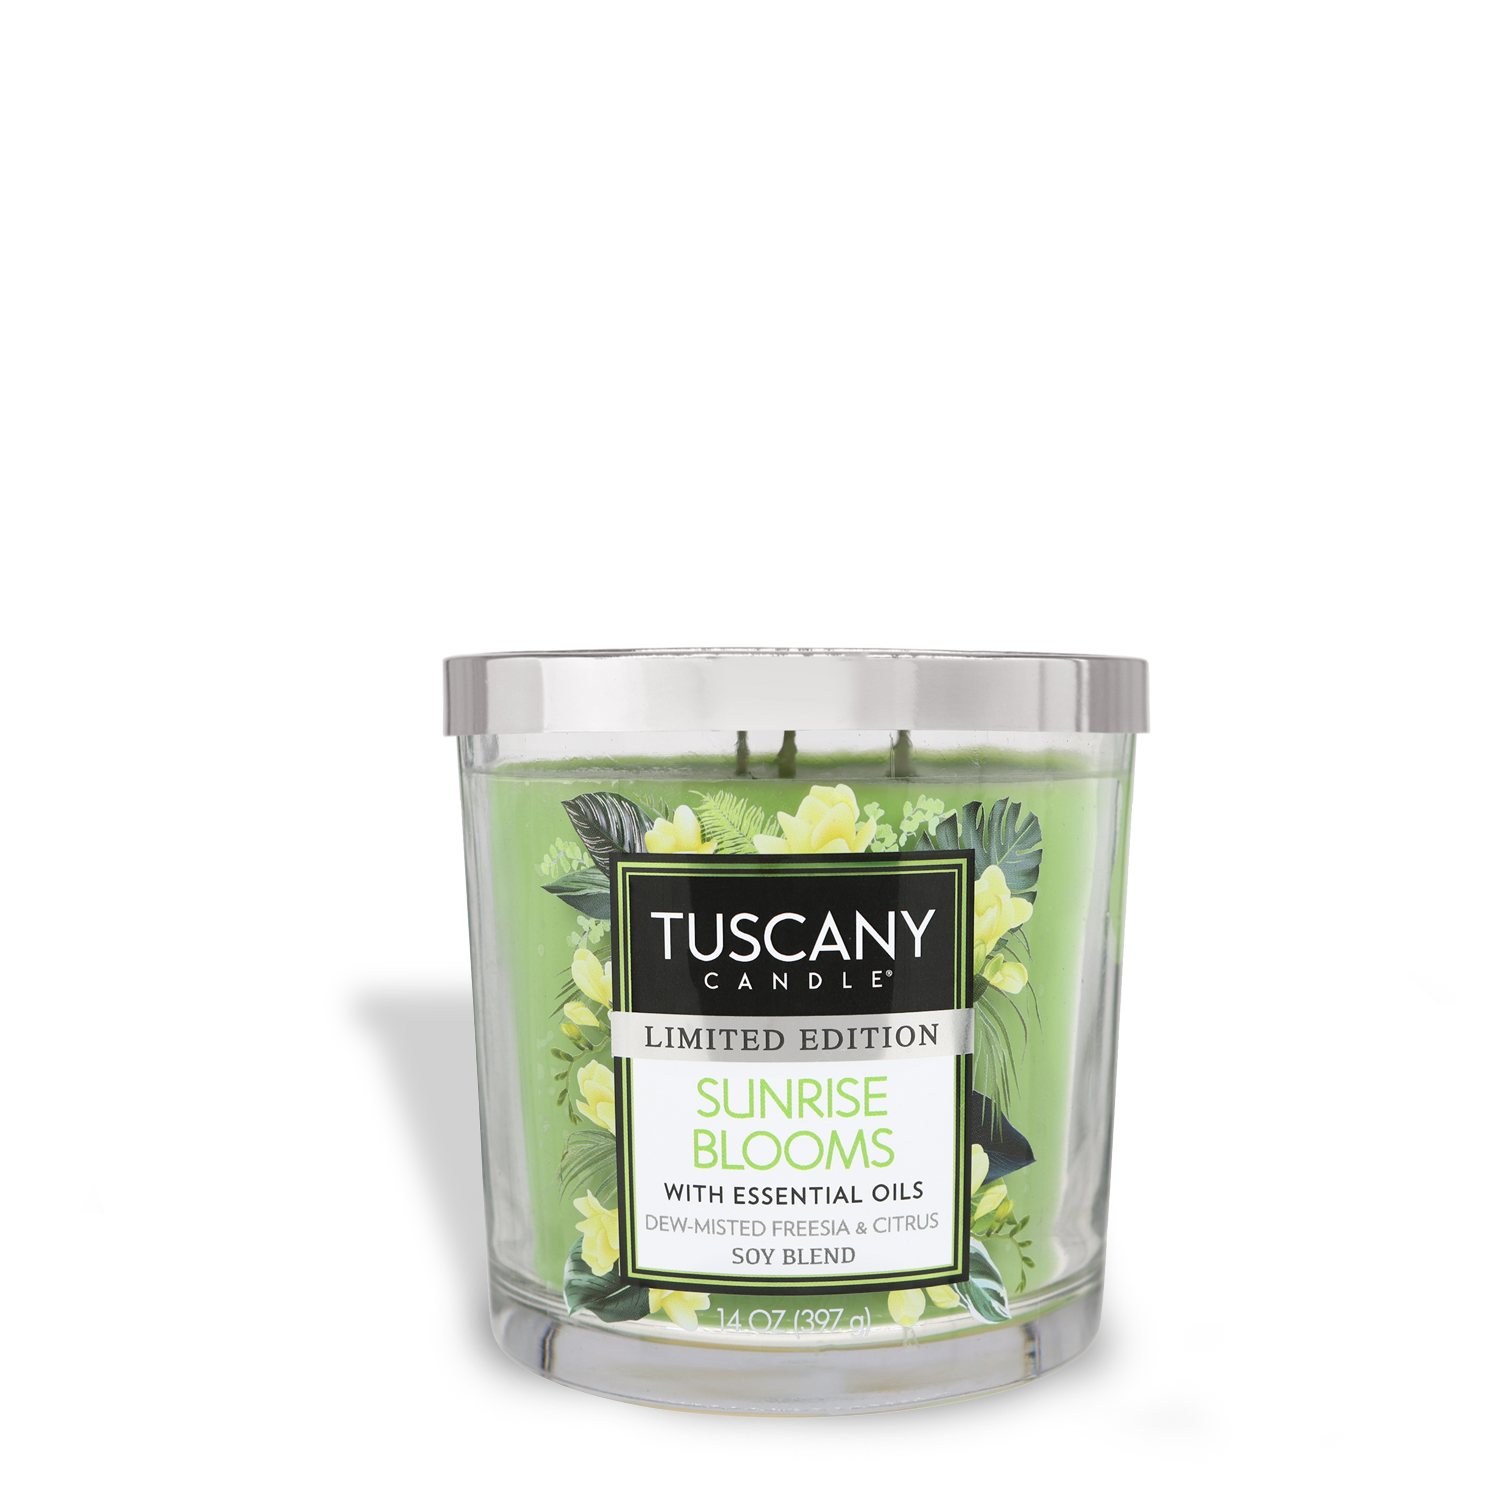 Sunrise Blooms Long-Lasting Scented Jar Candle (14 oz) from Tuscany Candle® SEASONAL featuring soft florals.